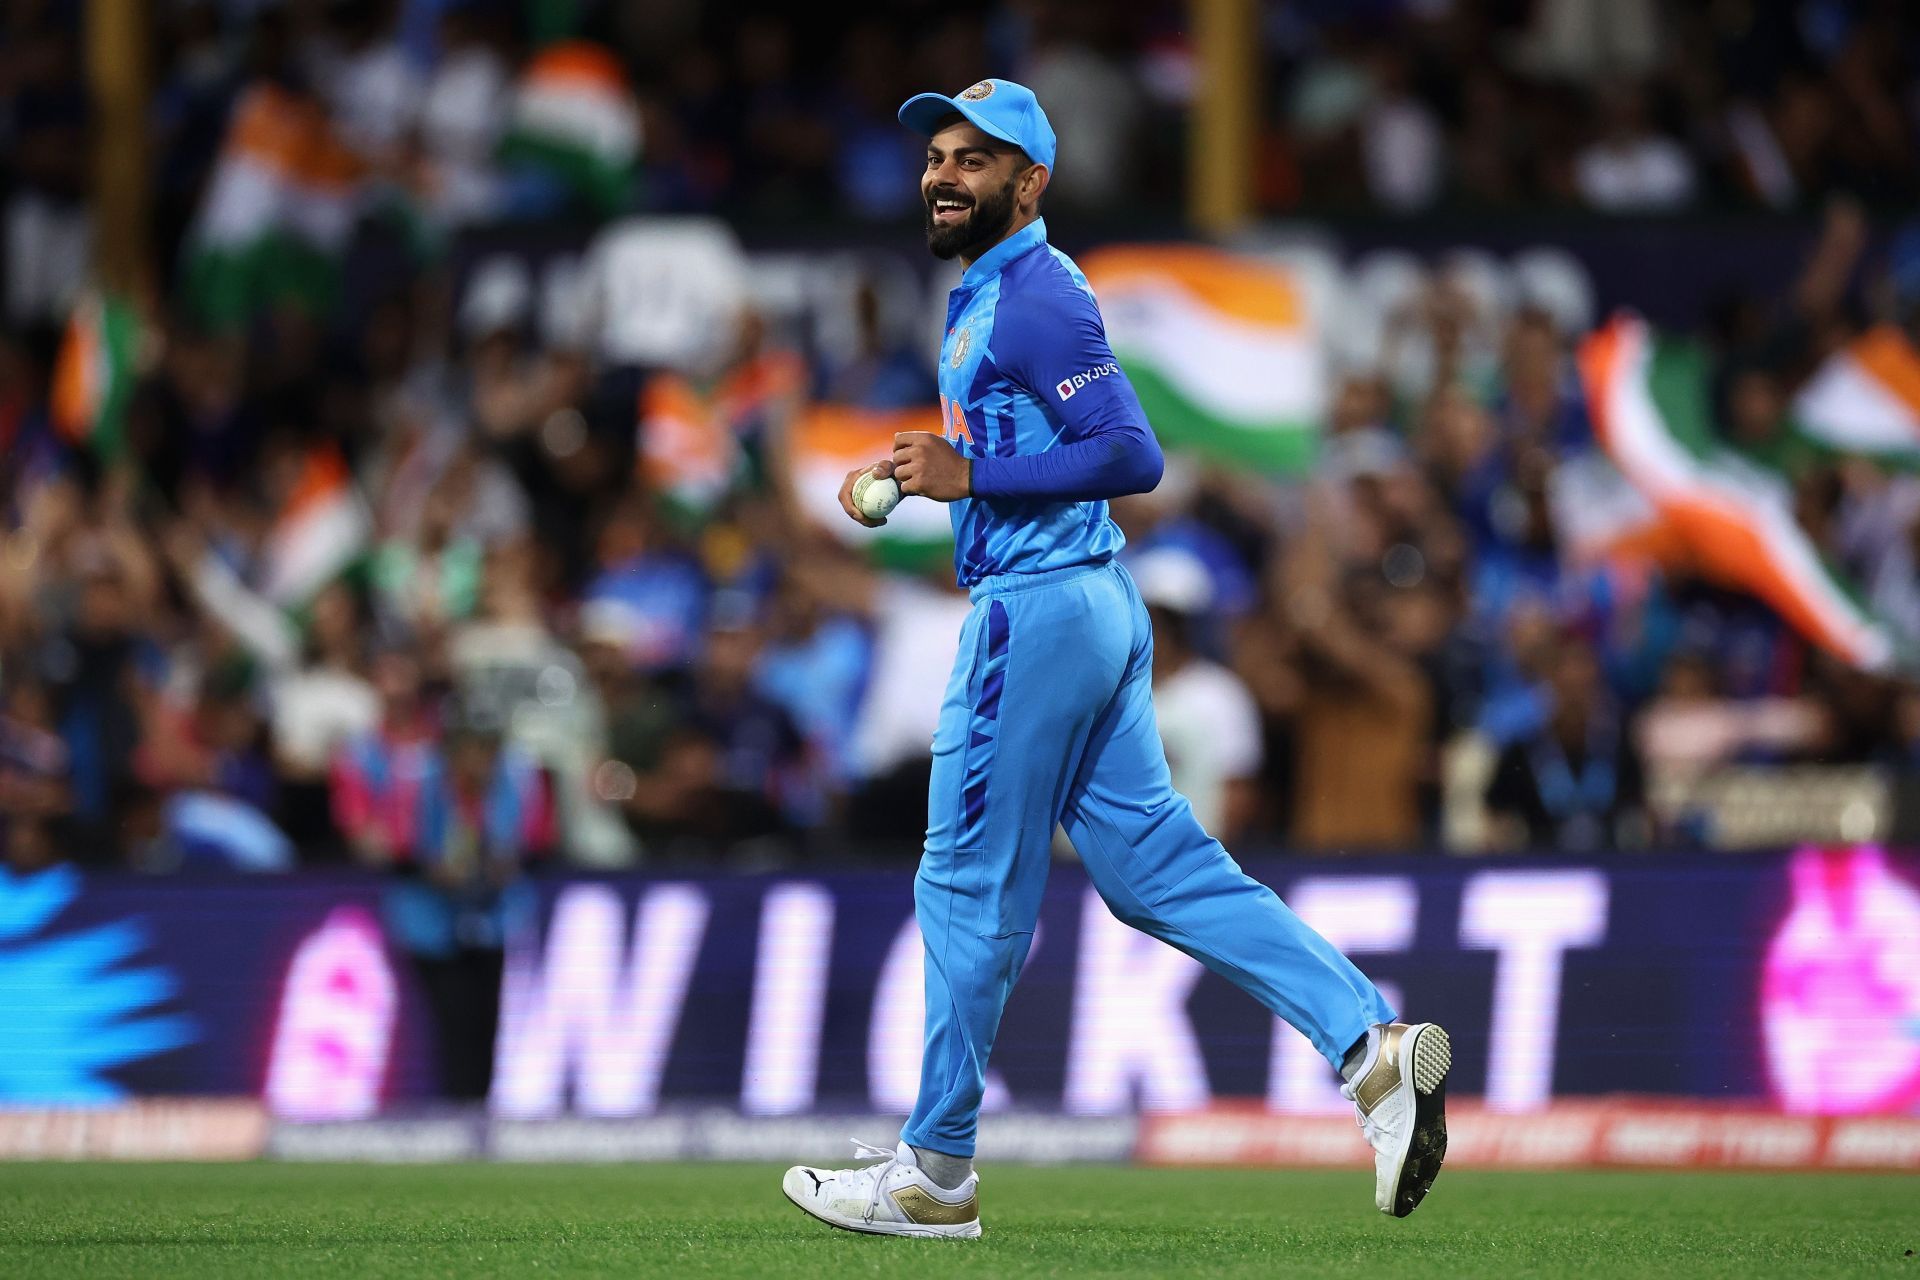 Virat Kohli is the current leading run-scorer in the 2022 World Cup